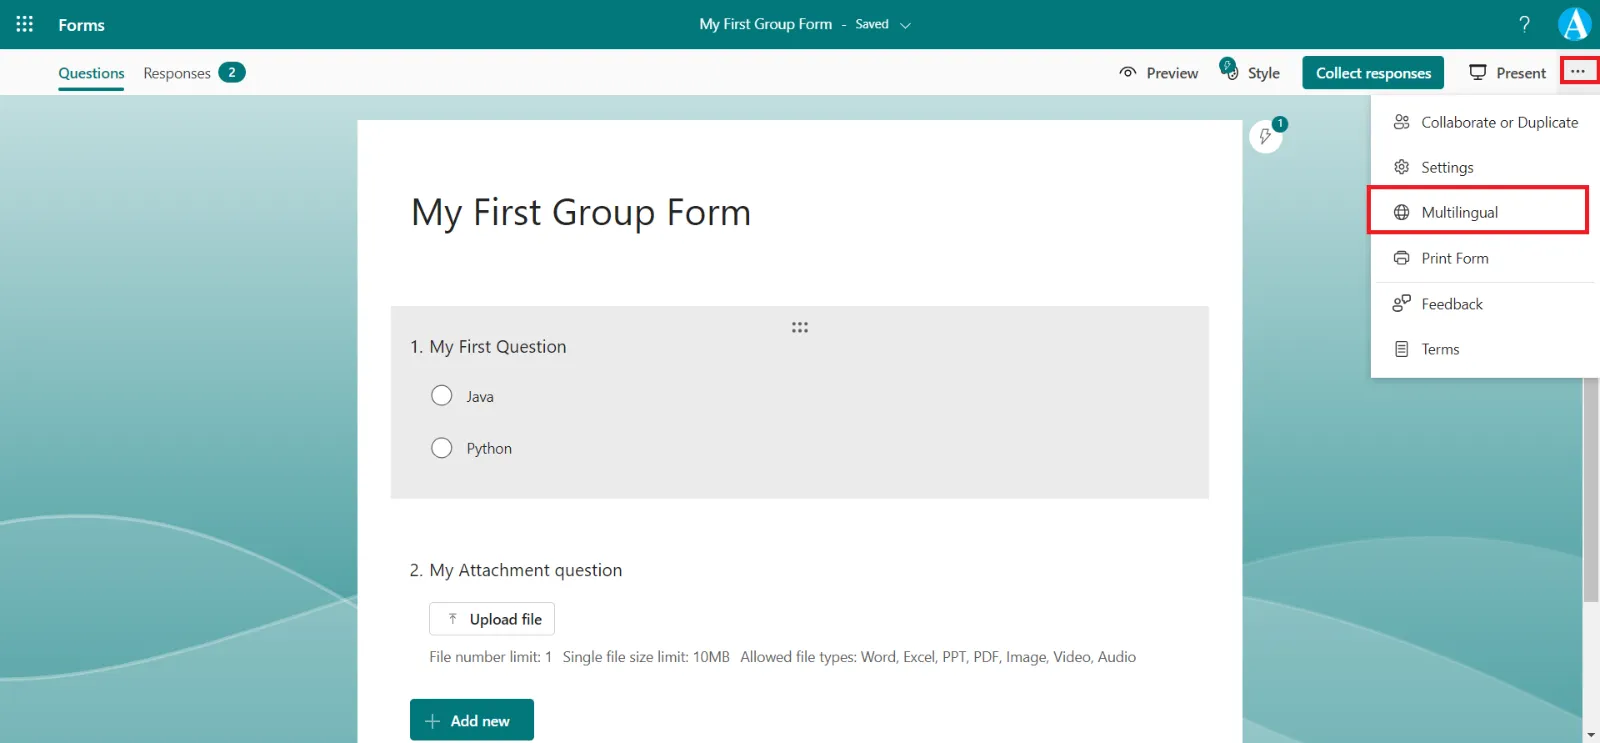 Multilingual feature in Microsoft Forms